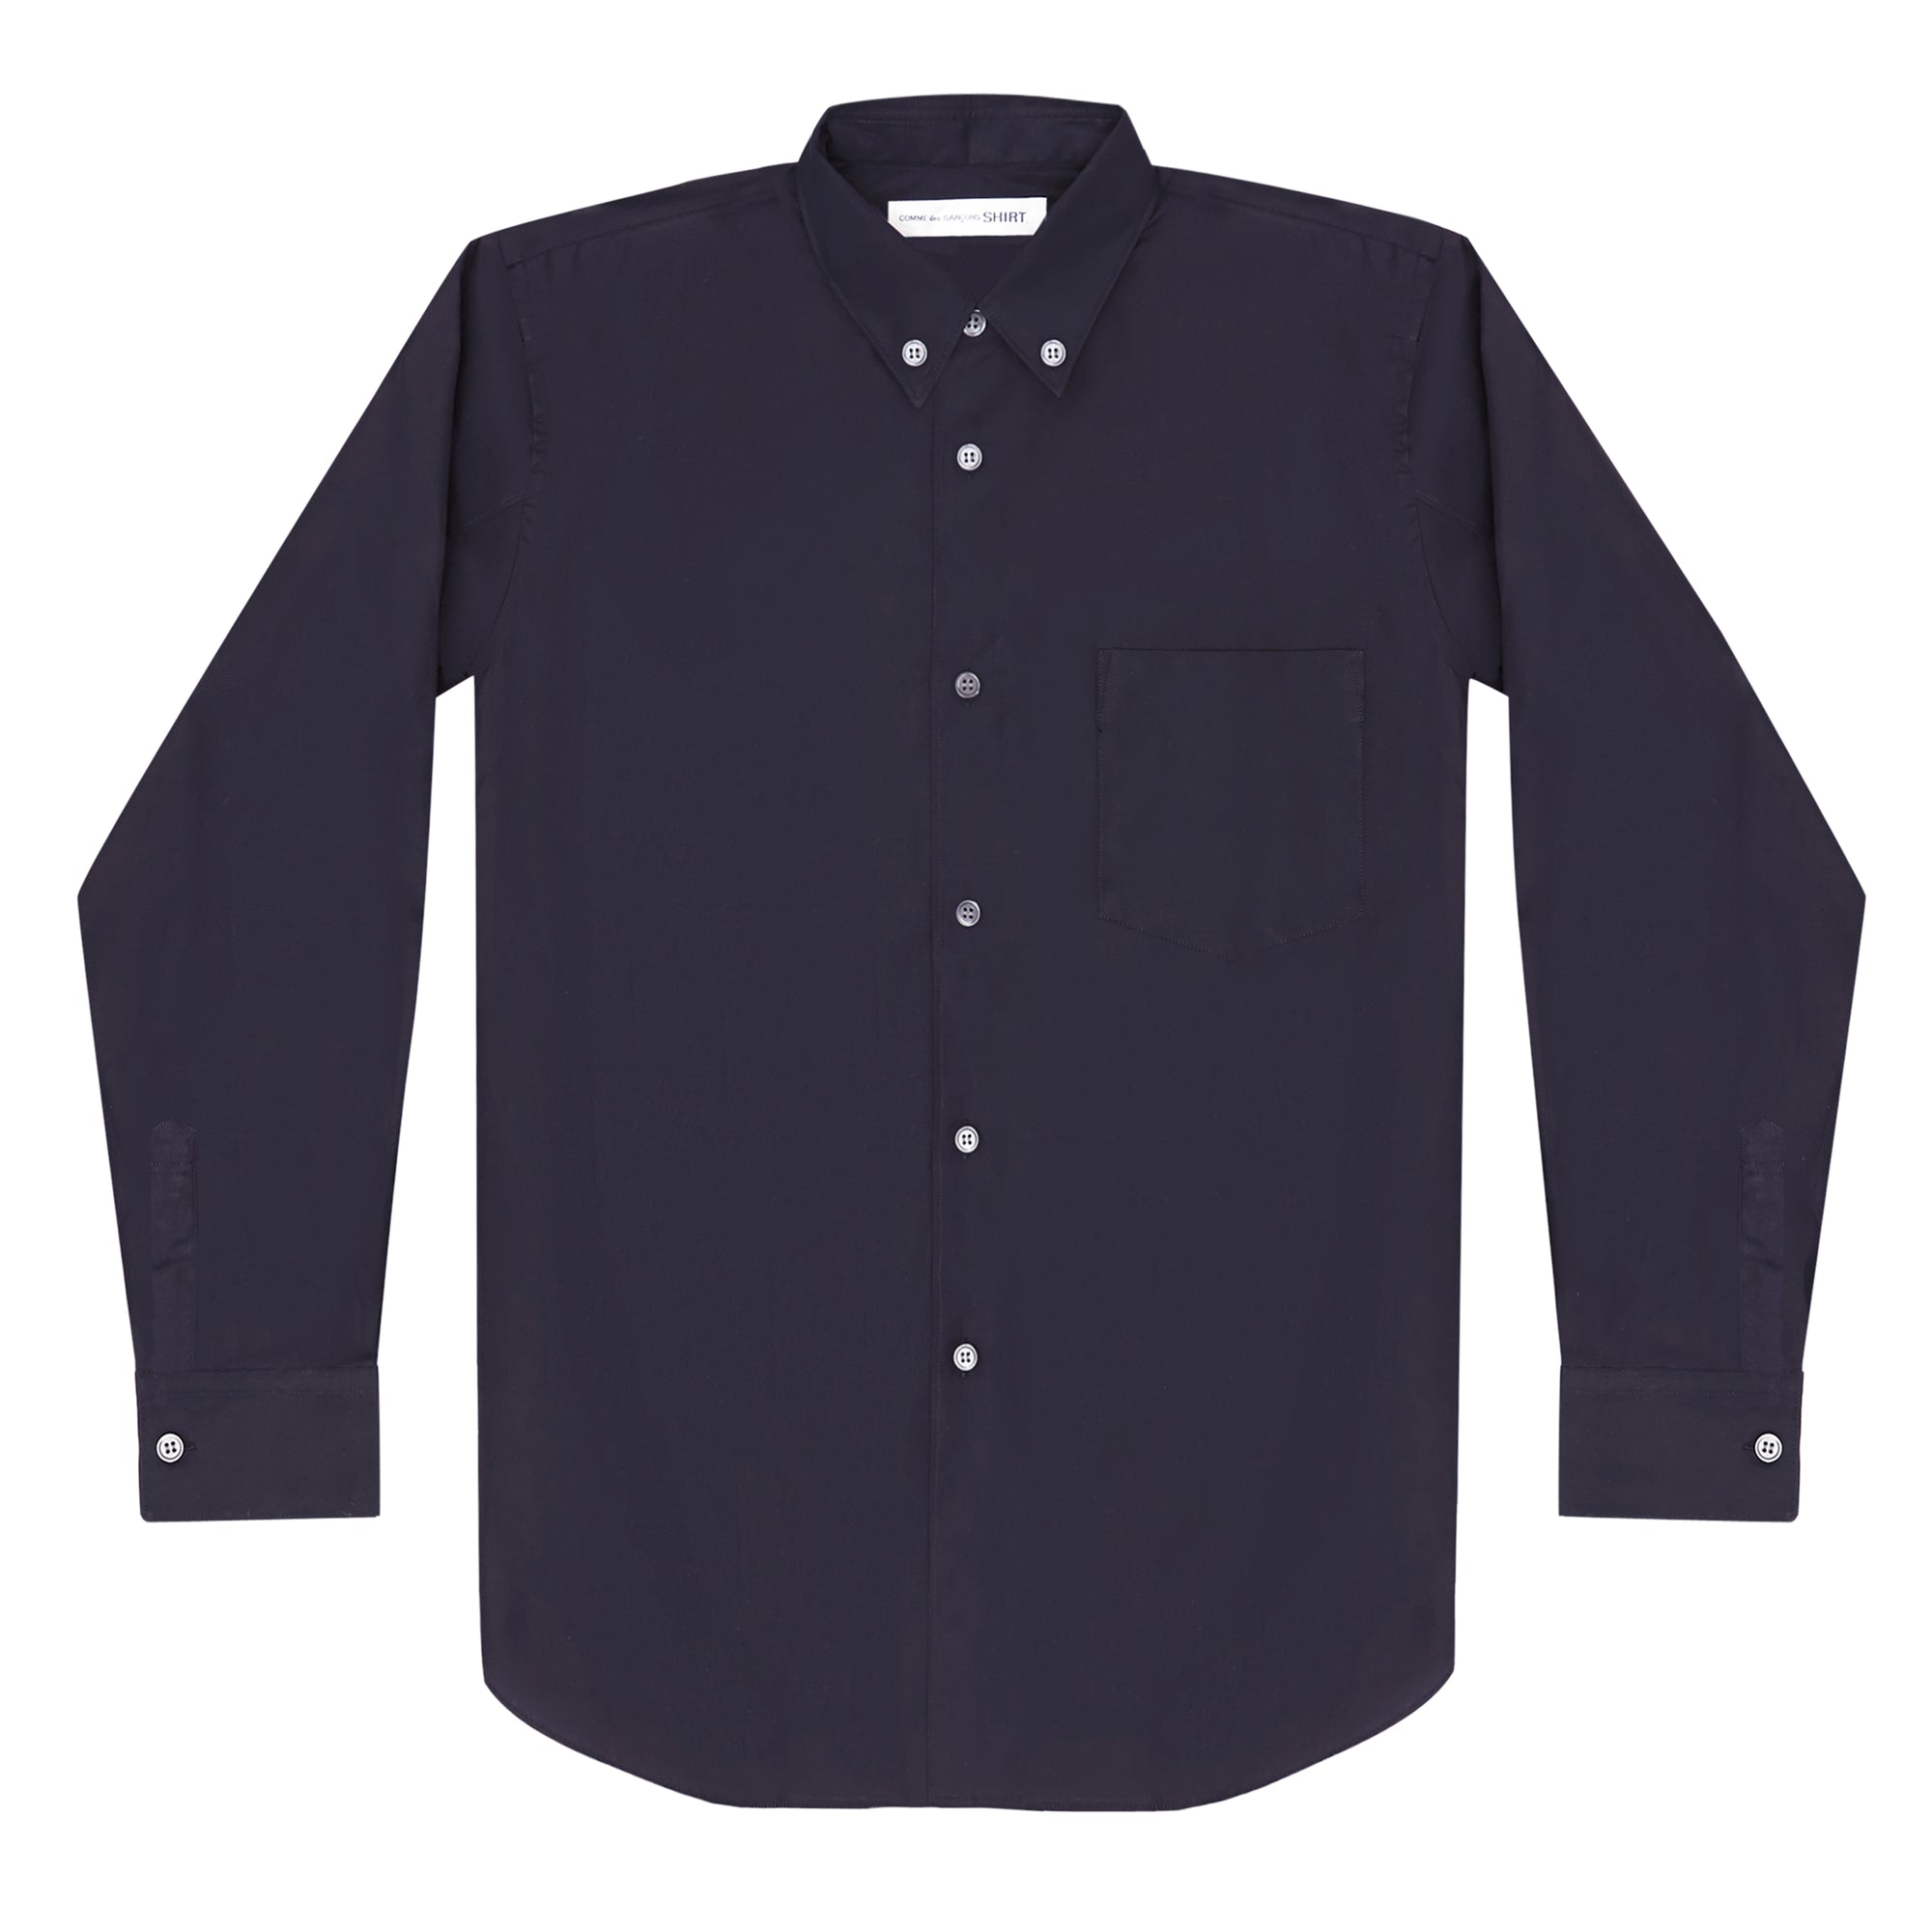 CDG SHIRT FOREVER - Slim Fit Button-Down Cotton Shirt CDGS6PLA - (Navy) view 1